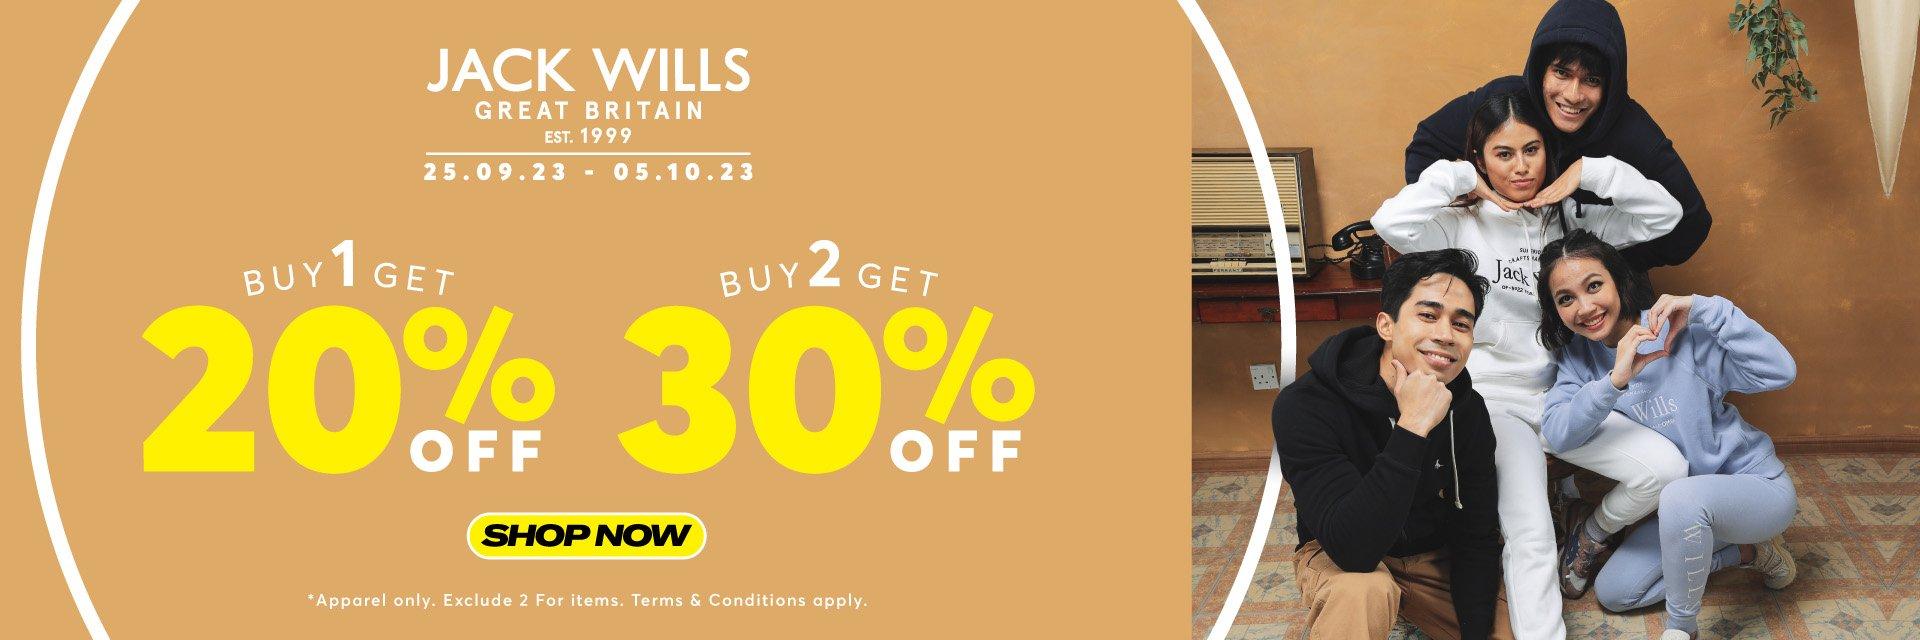 Jack Wills 1 for 20% 2 for 30%